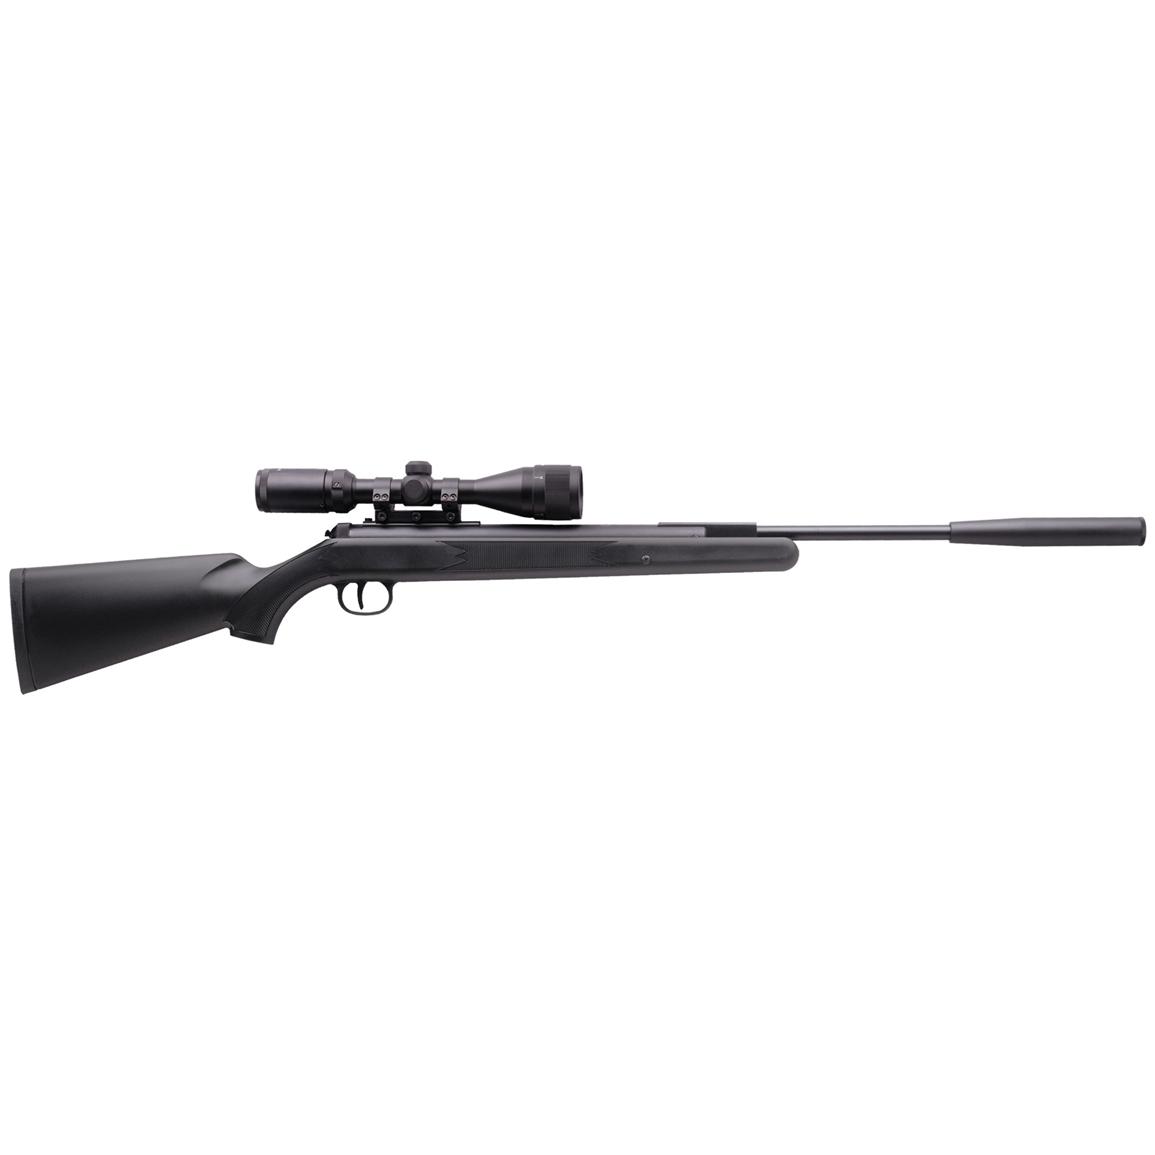  RWS   34  Panther Pro 177 Air  Rifle  with Airgun Scope 